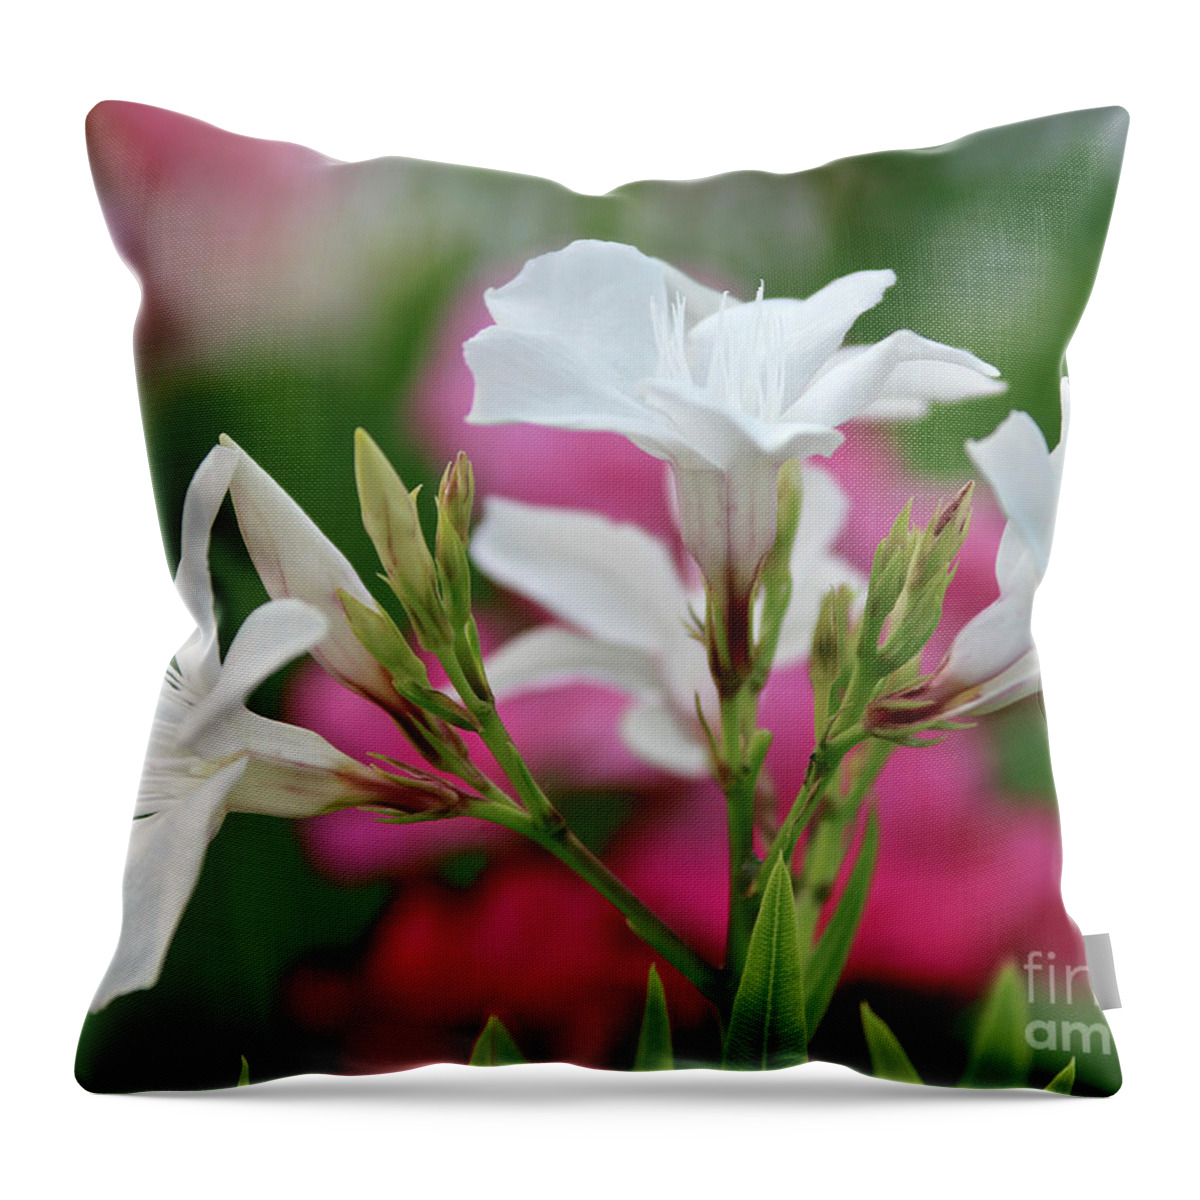 Oleander Throw Pillow featuring the photograph Oleander Casablanca 1 by Wilhelm Hufnagl